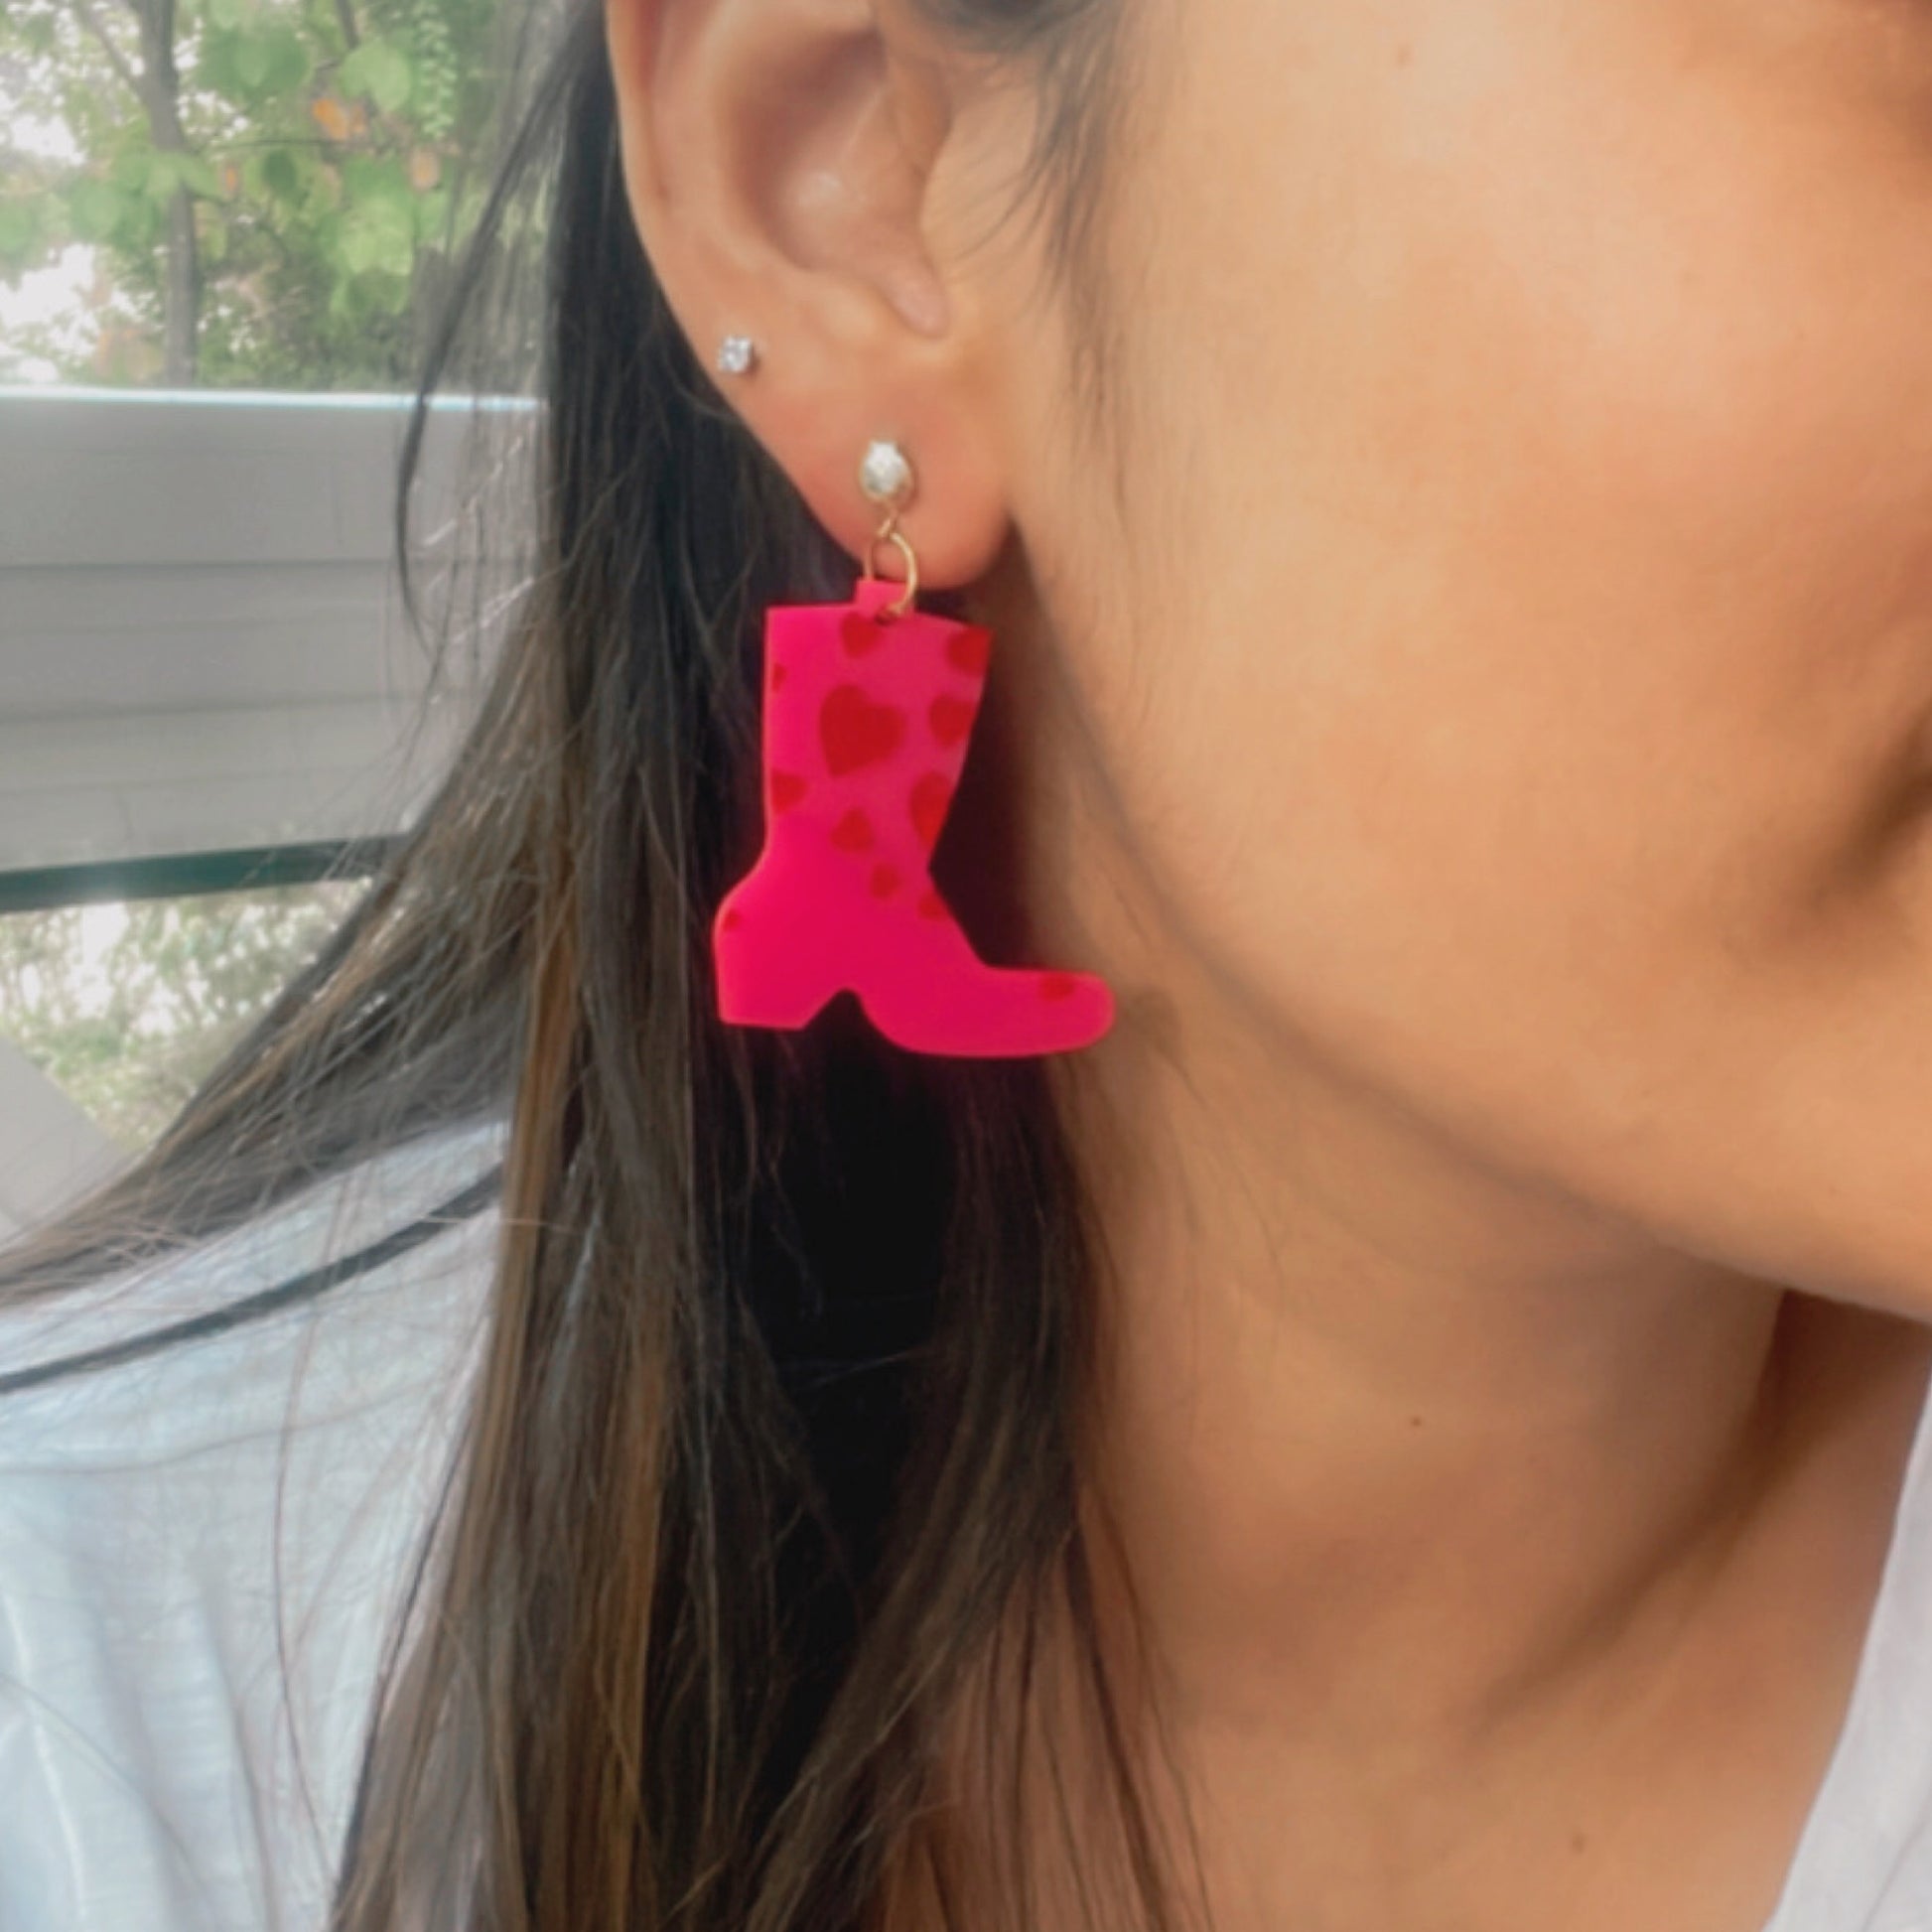 Splashy Rainboots Earrings - Pink and Red - worn by a woman